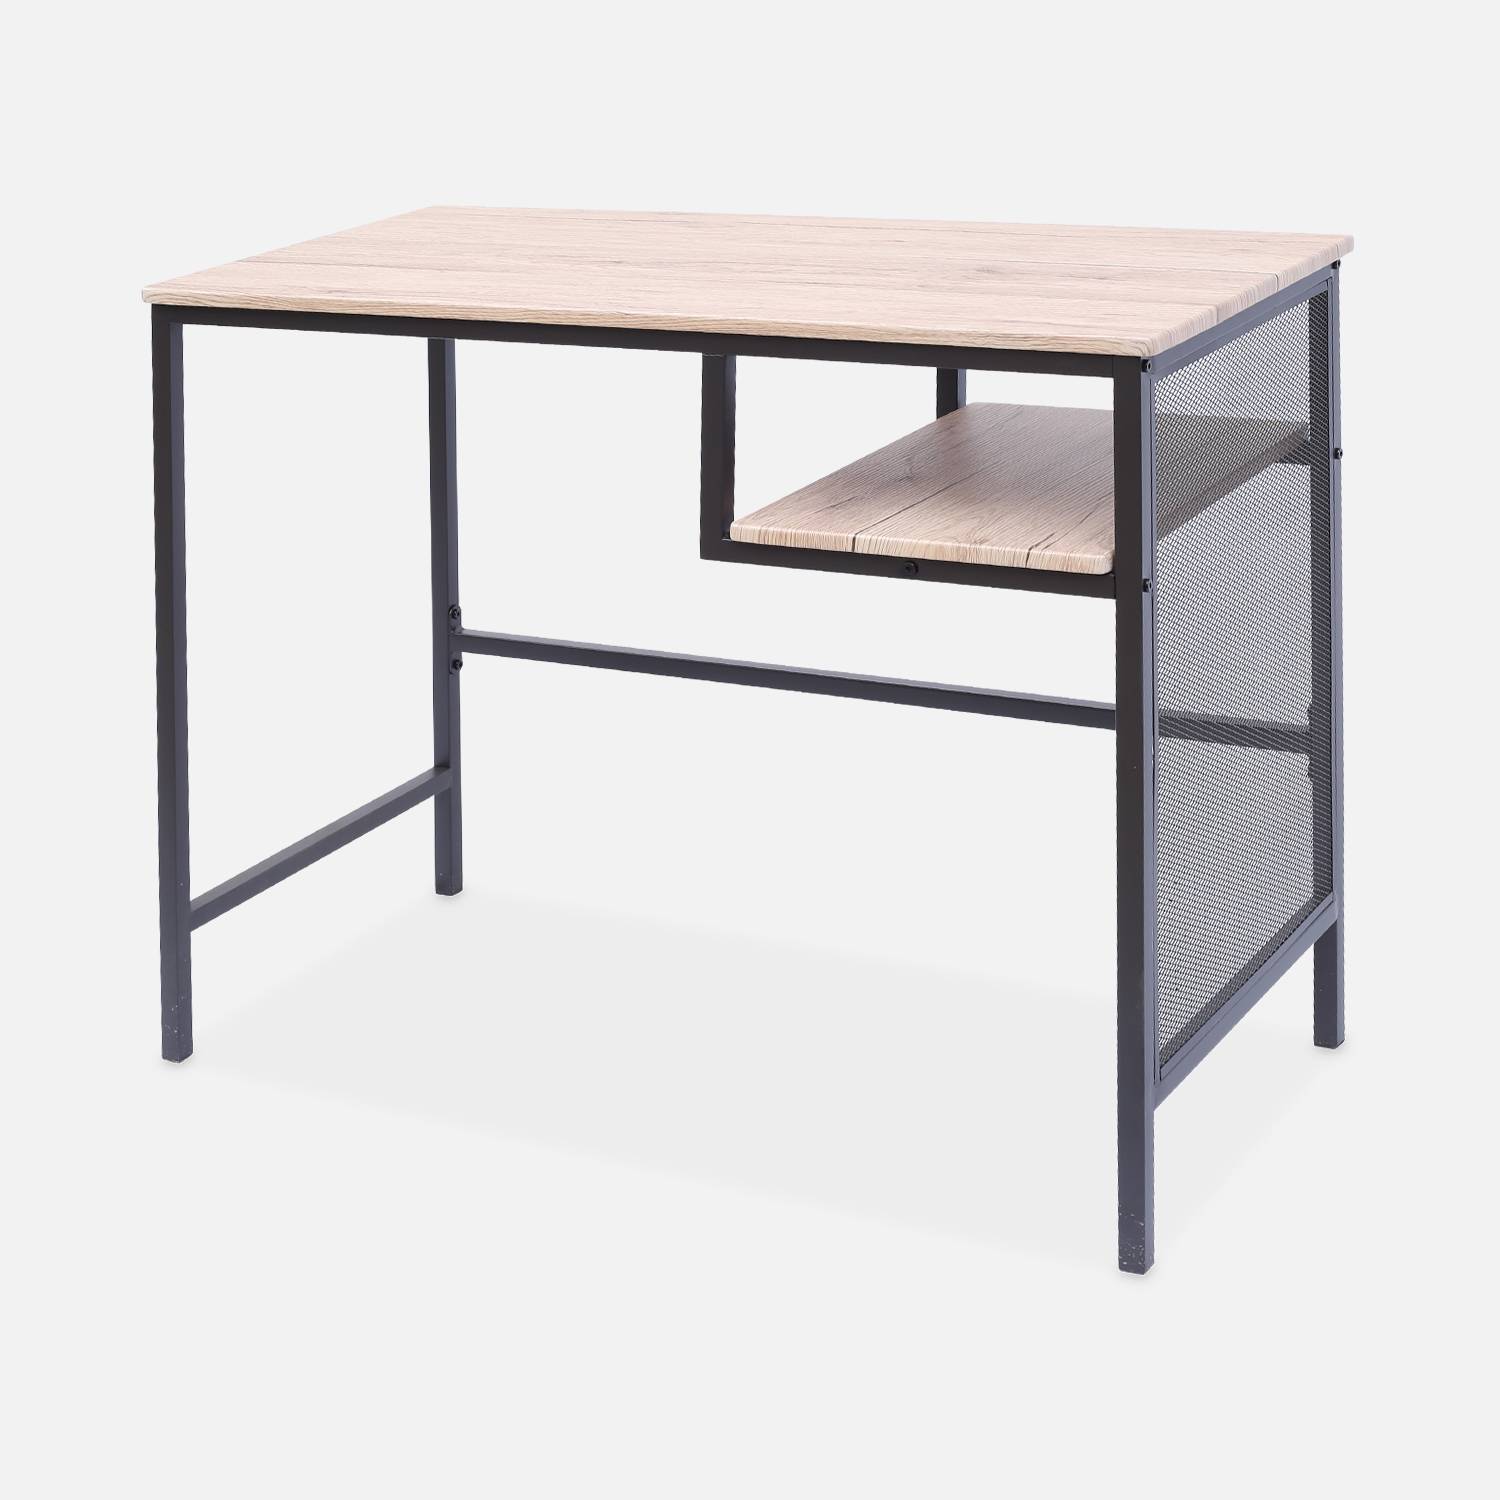 Metal and Wood Effect Desk with Storage Compartment, 90cm Photo5